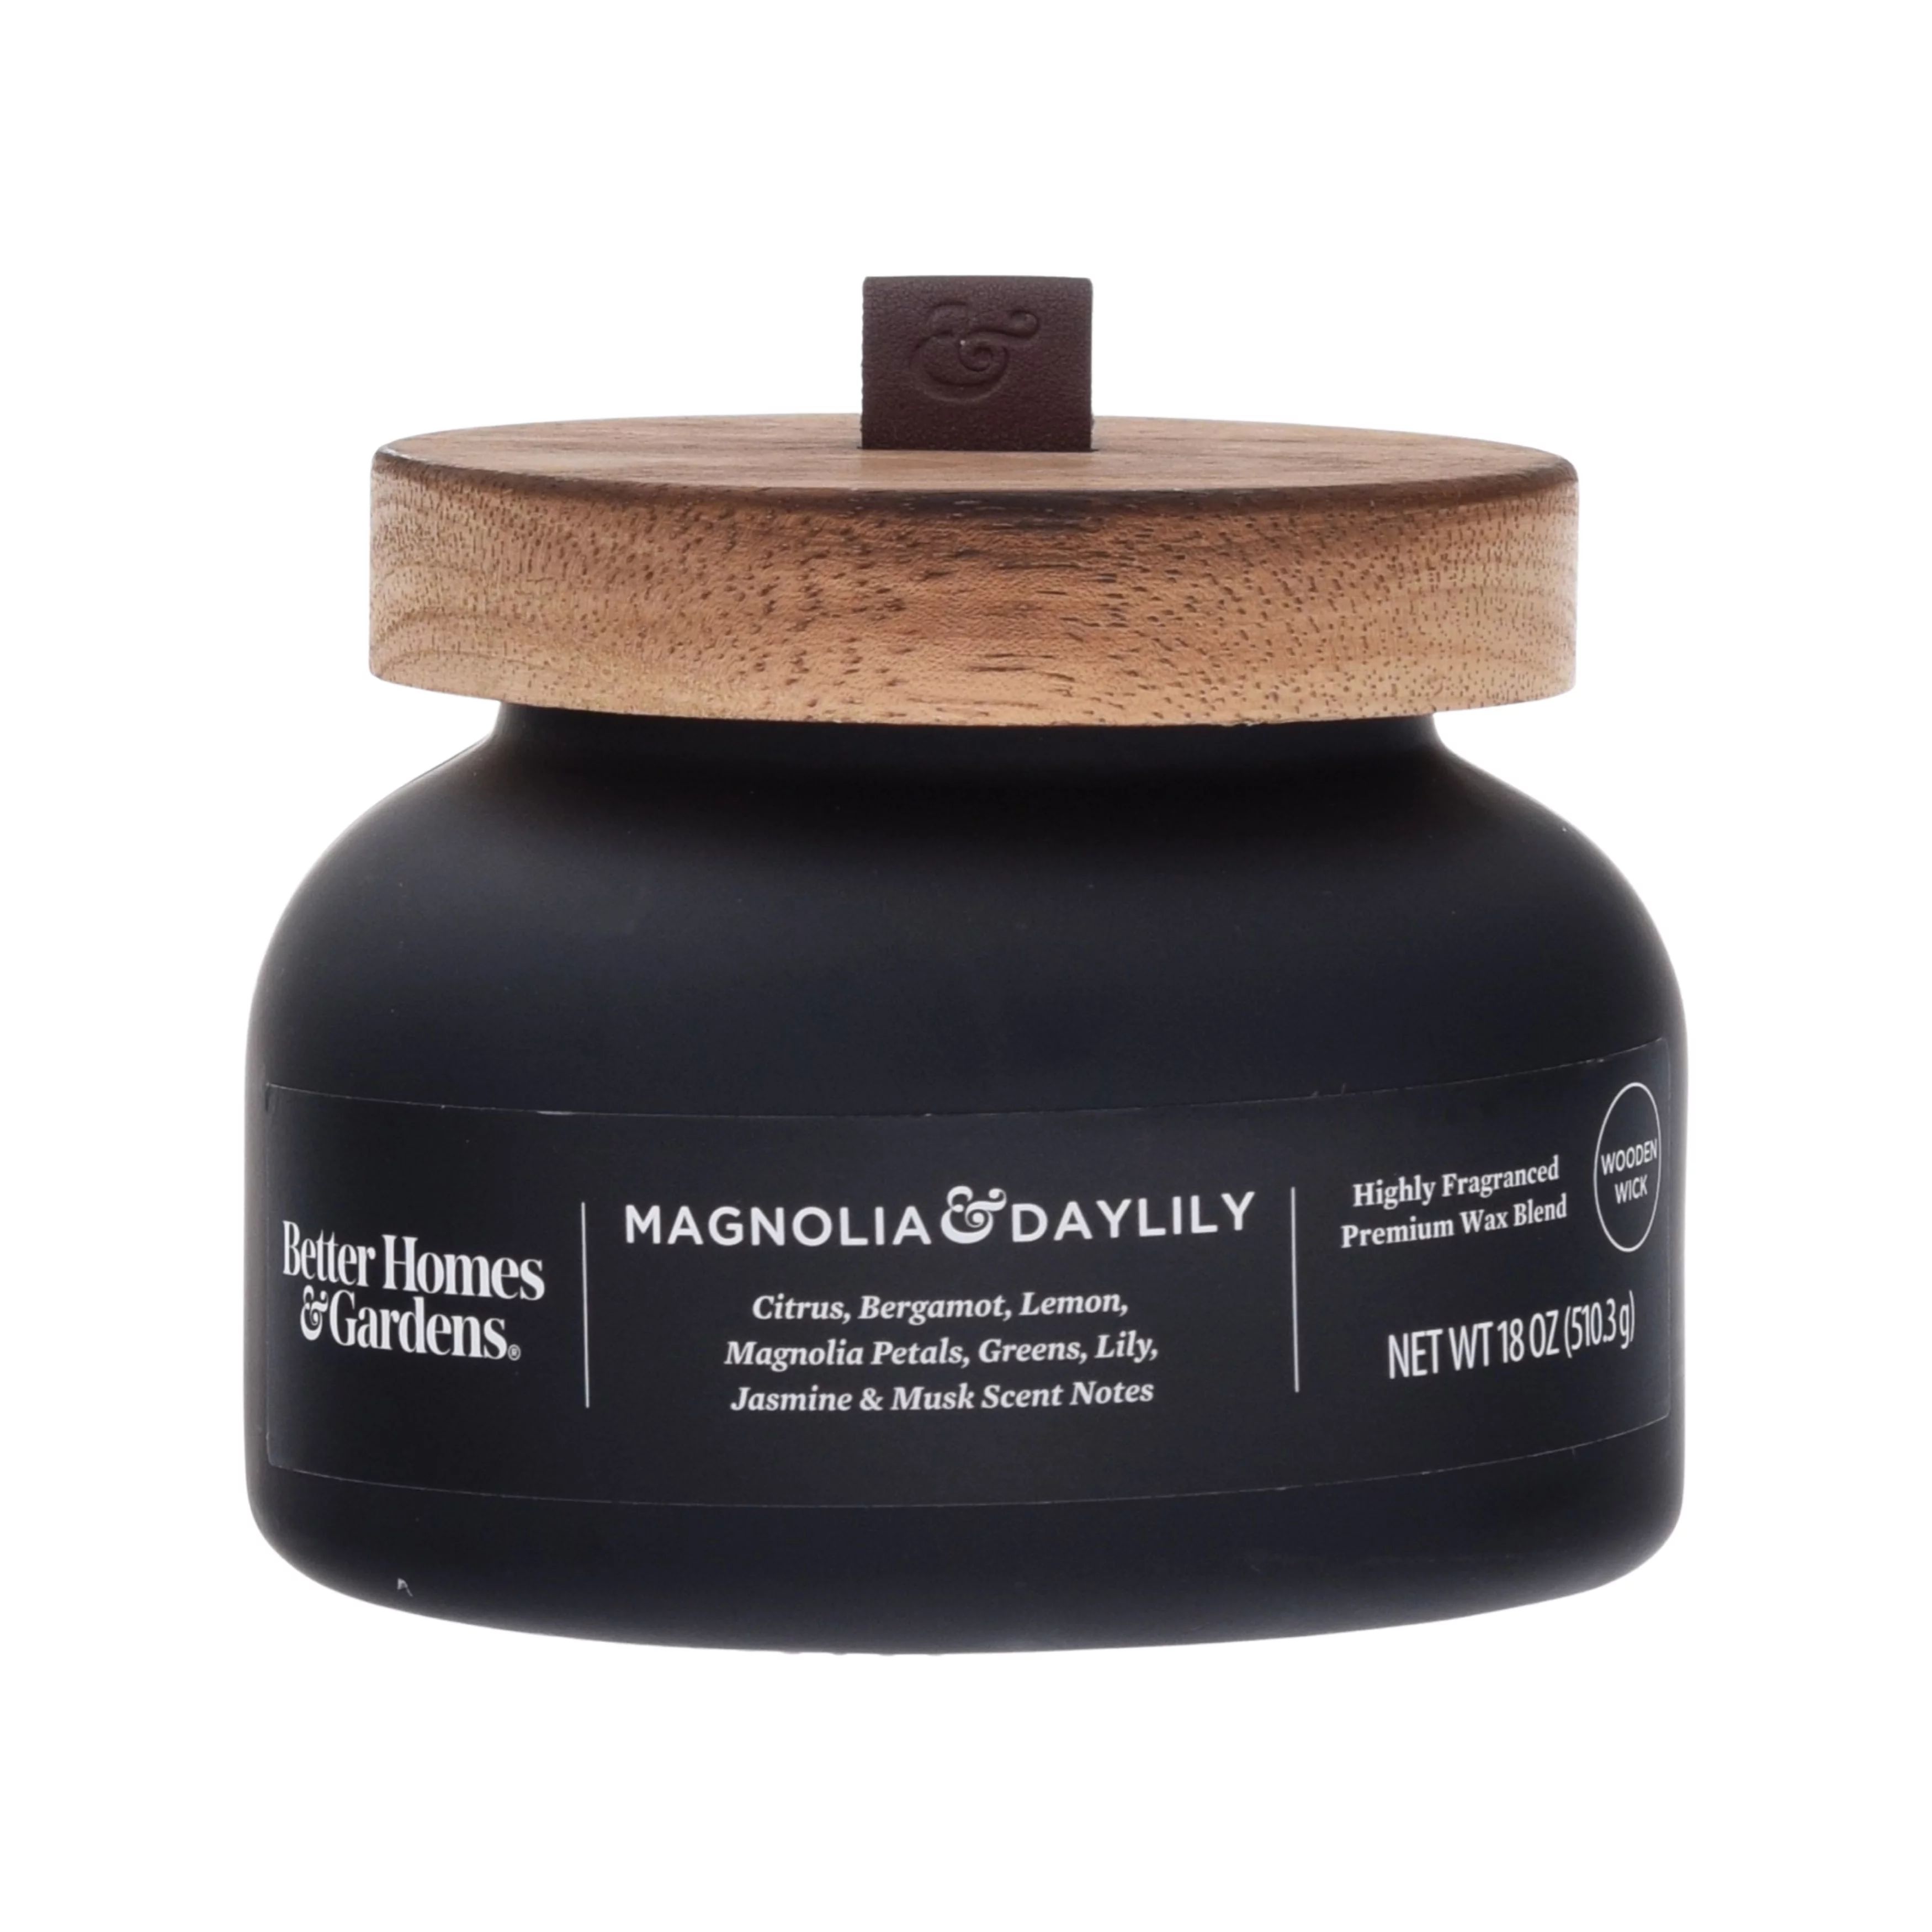 Better Homes & Gardens 18oz Magonolia & Daylily Scented Wooden Wick Bell Jar Candle | Walmart (US)